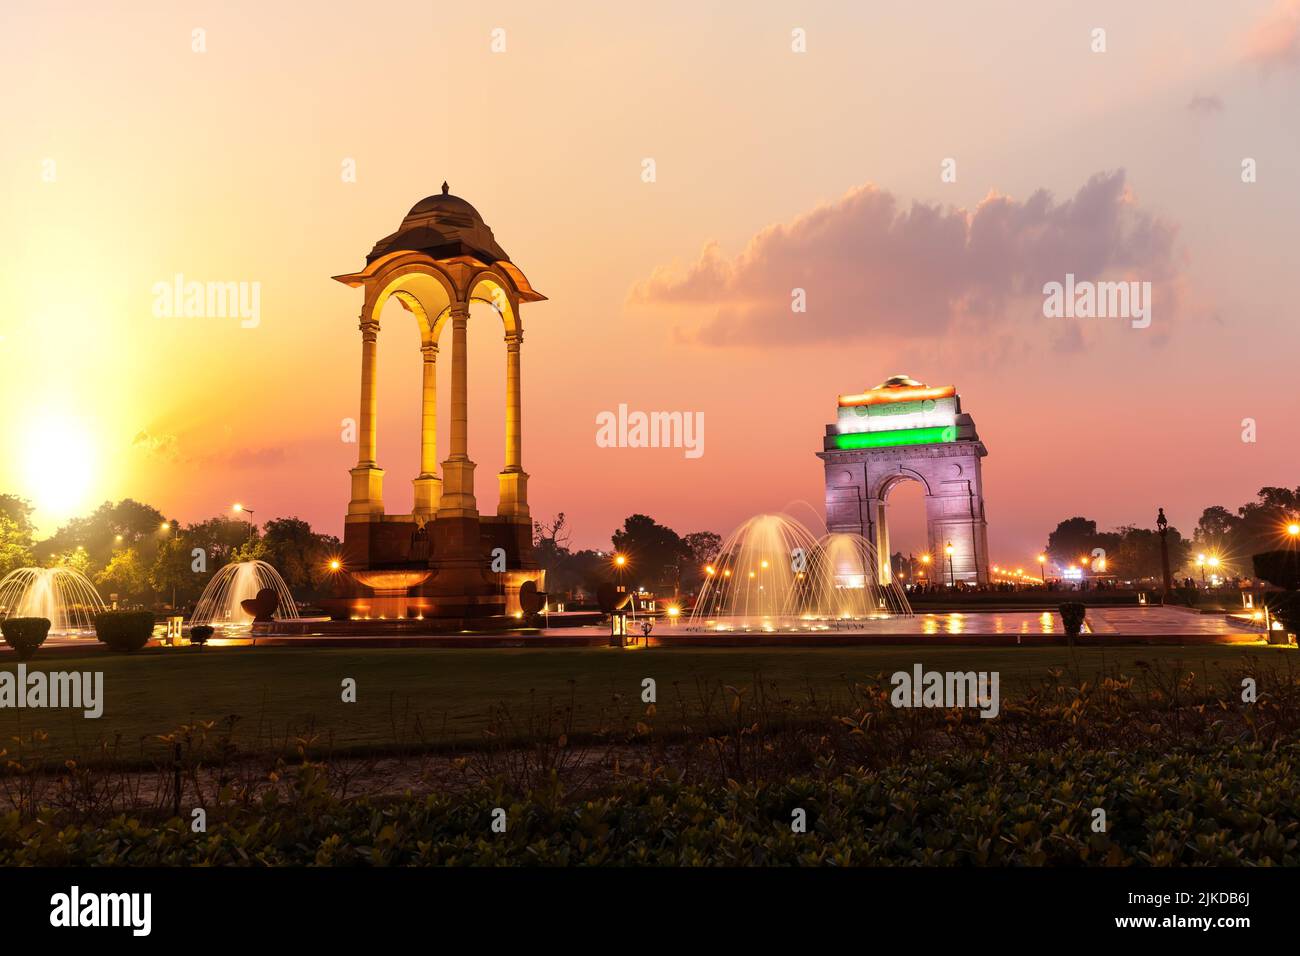 India Gate and the Canopy in the evening, New Delhi. Stock Photo